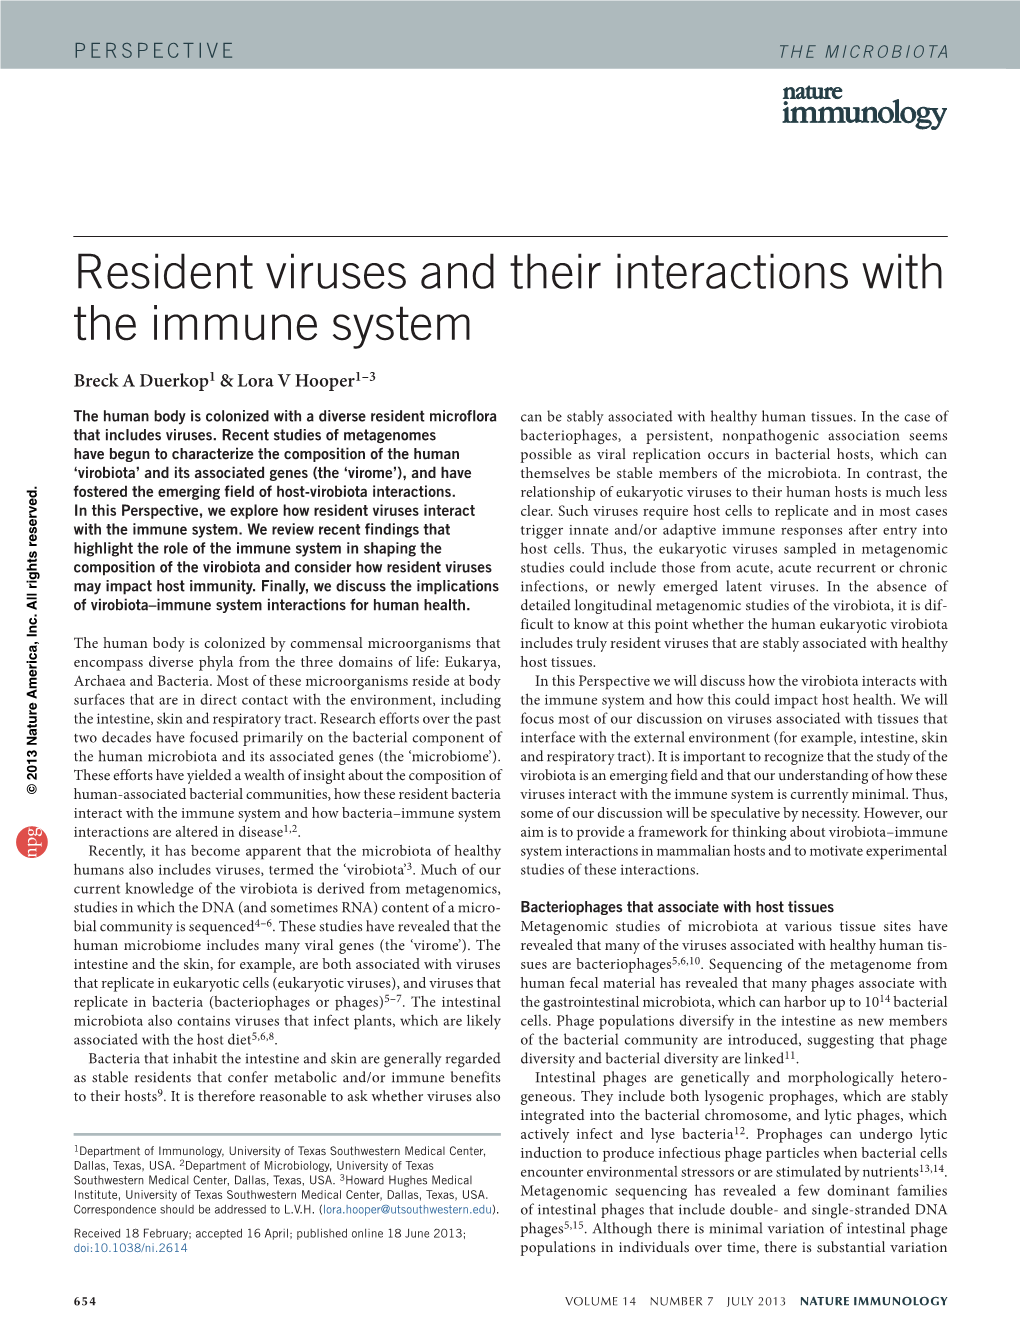 Resident Viruses and Their Interactions with the Immune System